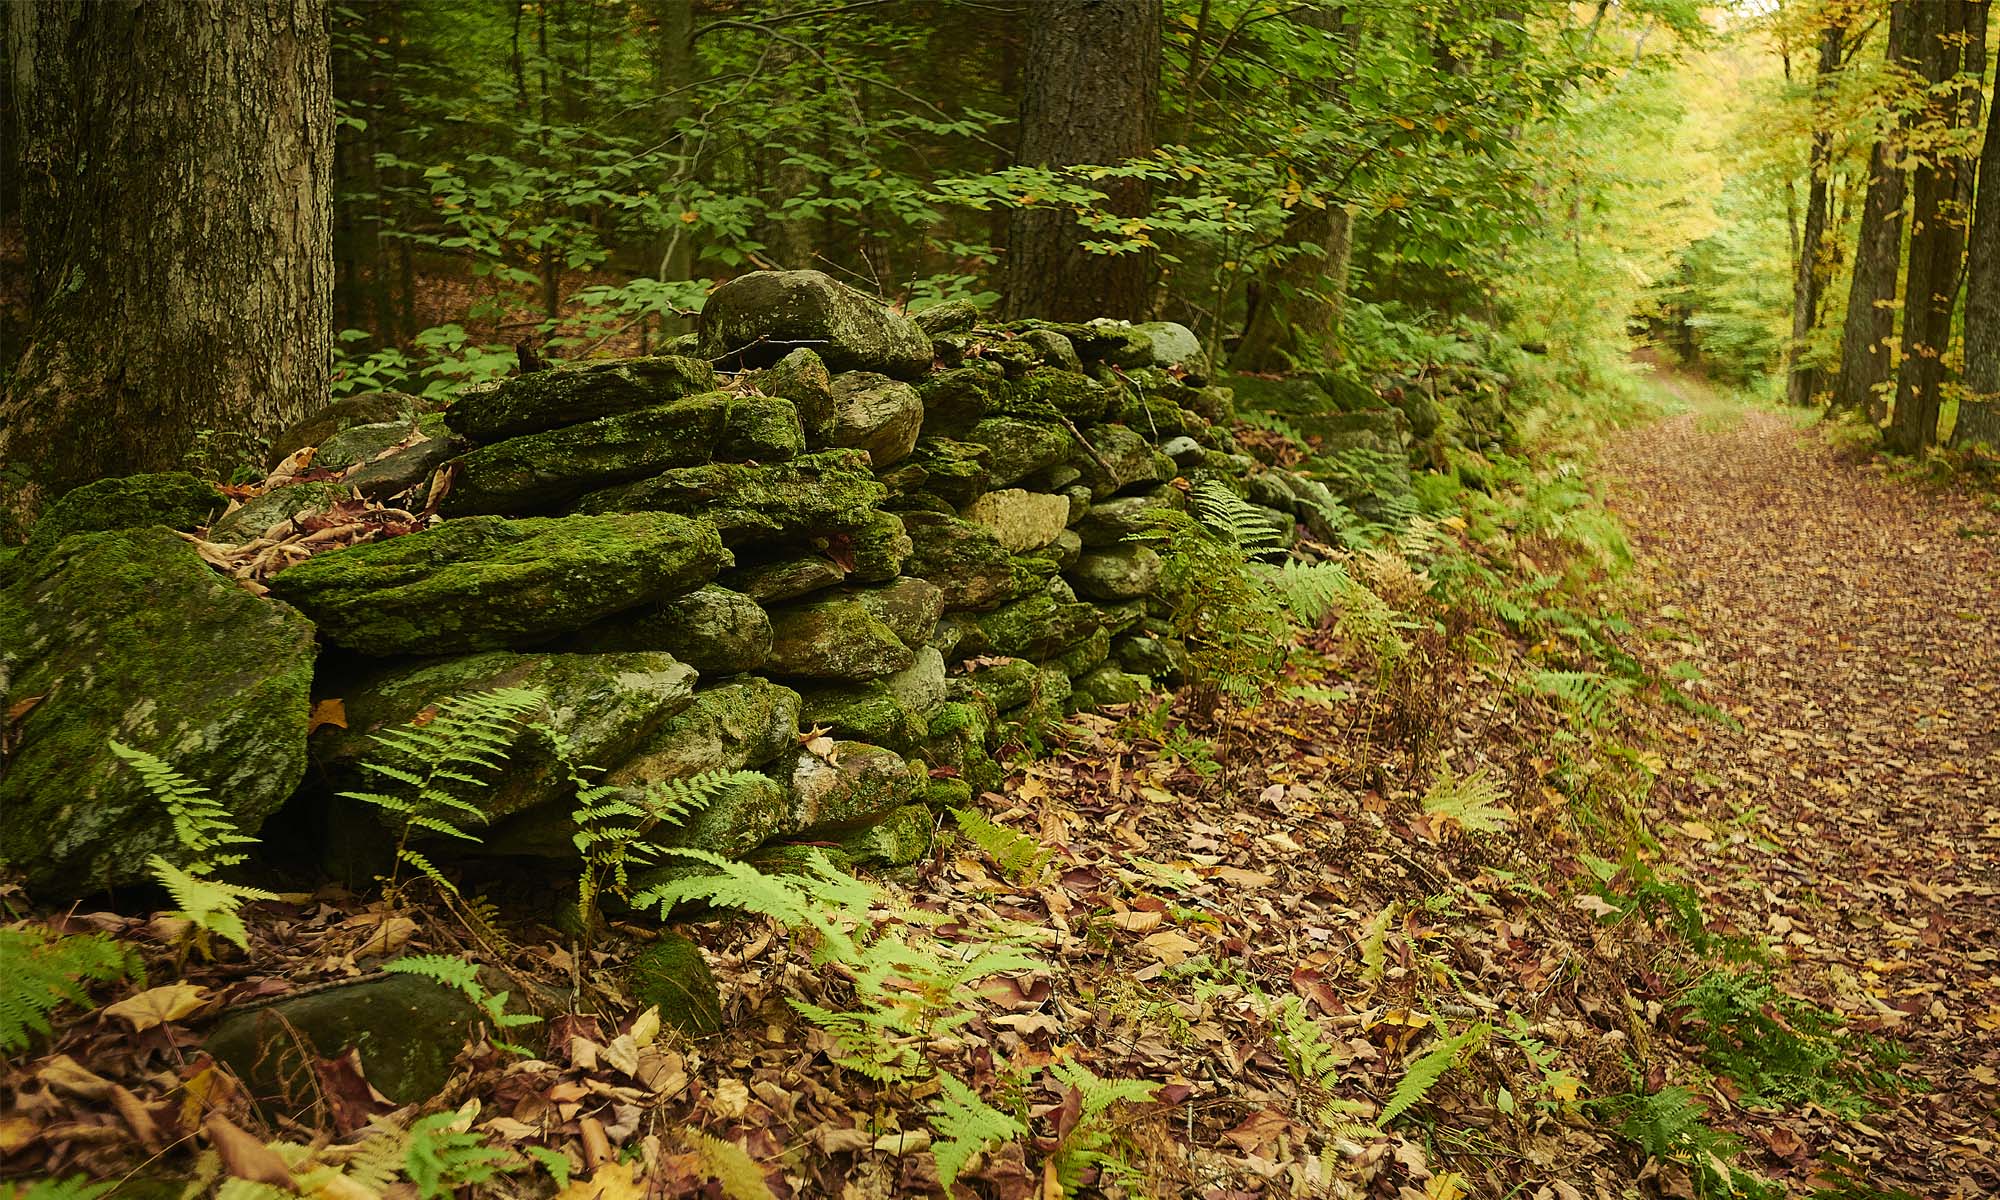 An old stone wall lines a leaf covered walking path in a forested woodland.